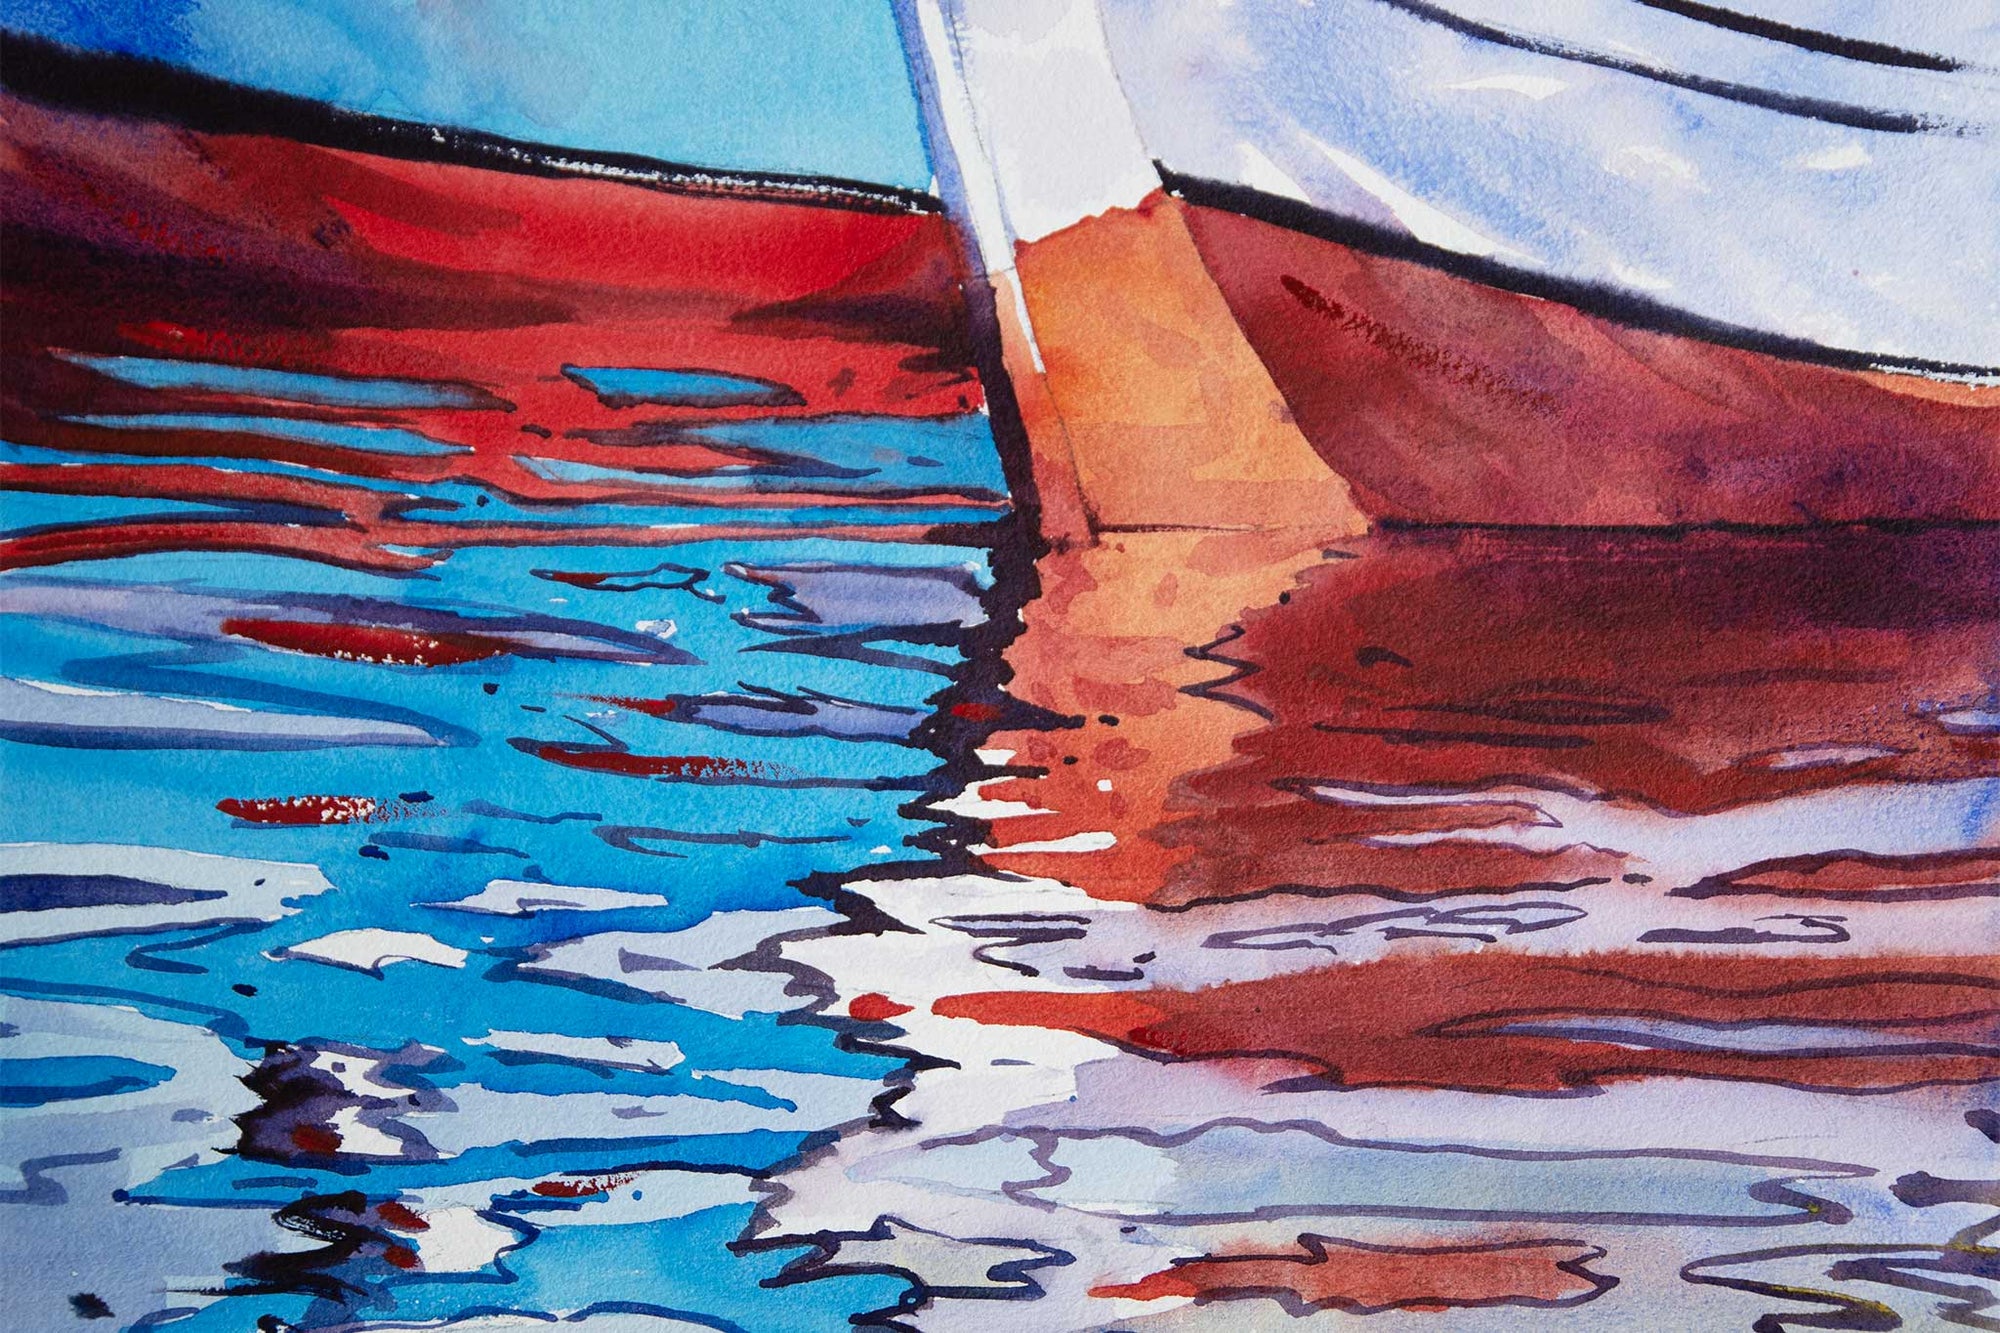 58. Boats & Reflections - Trusting the Shapes